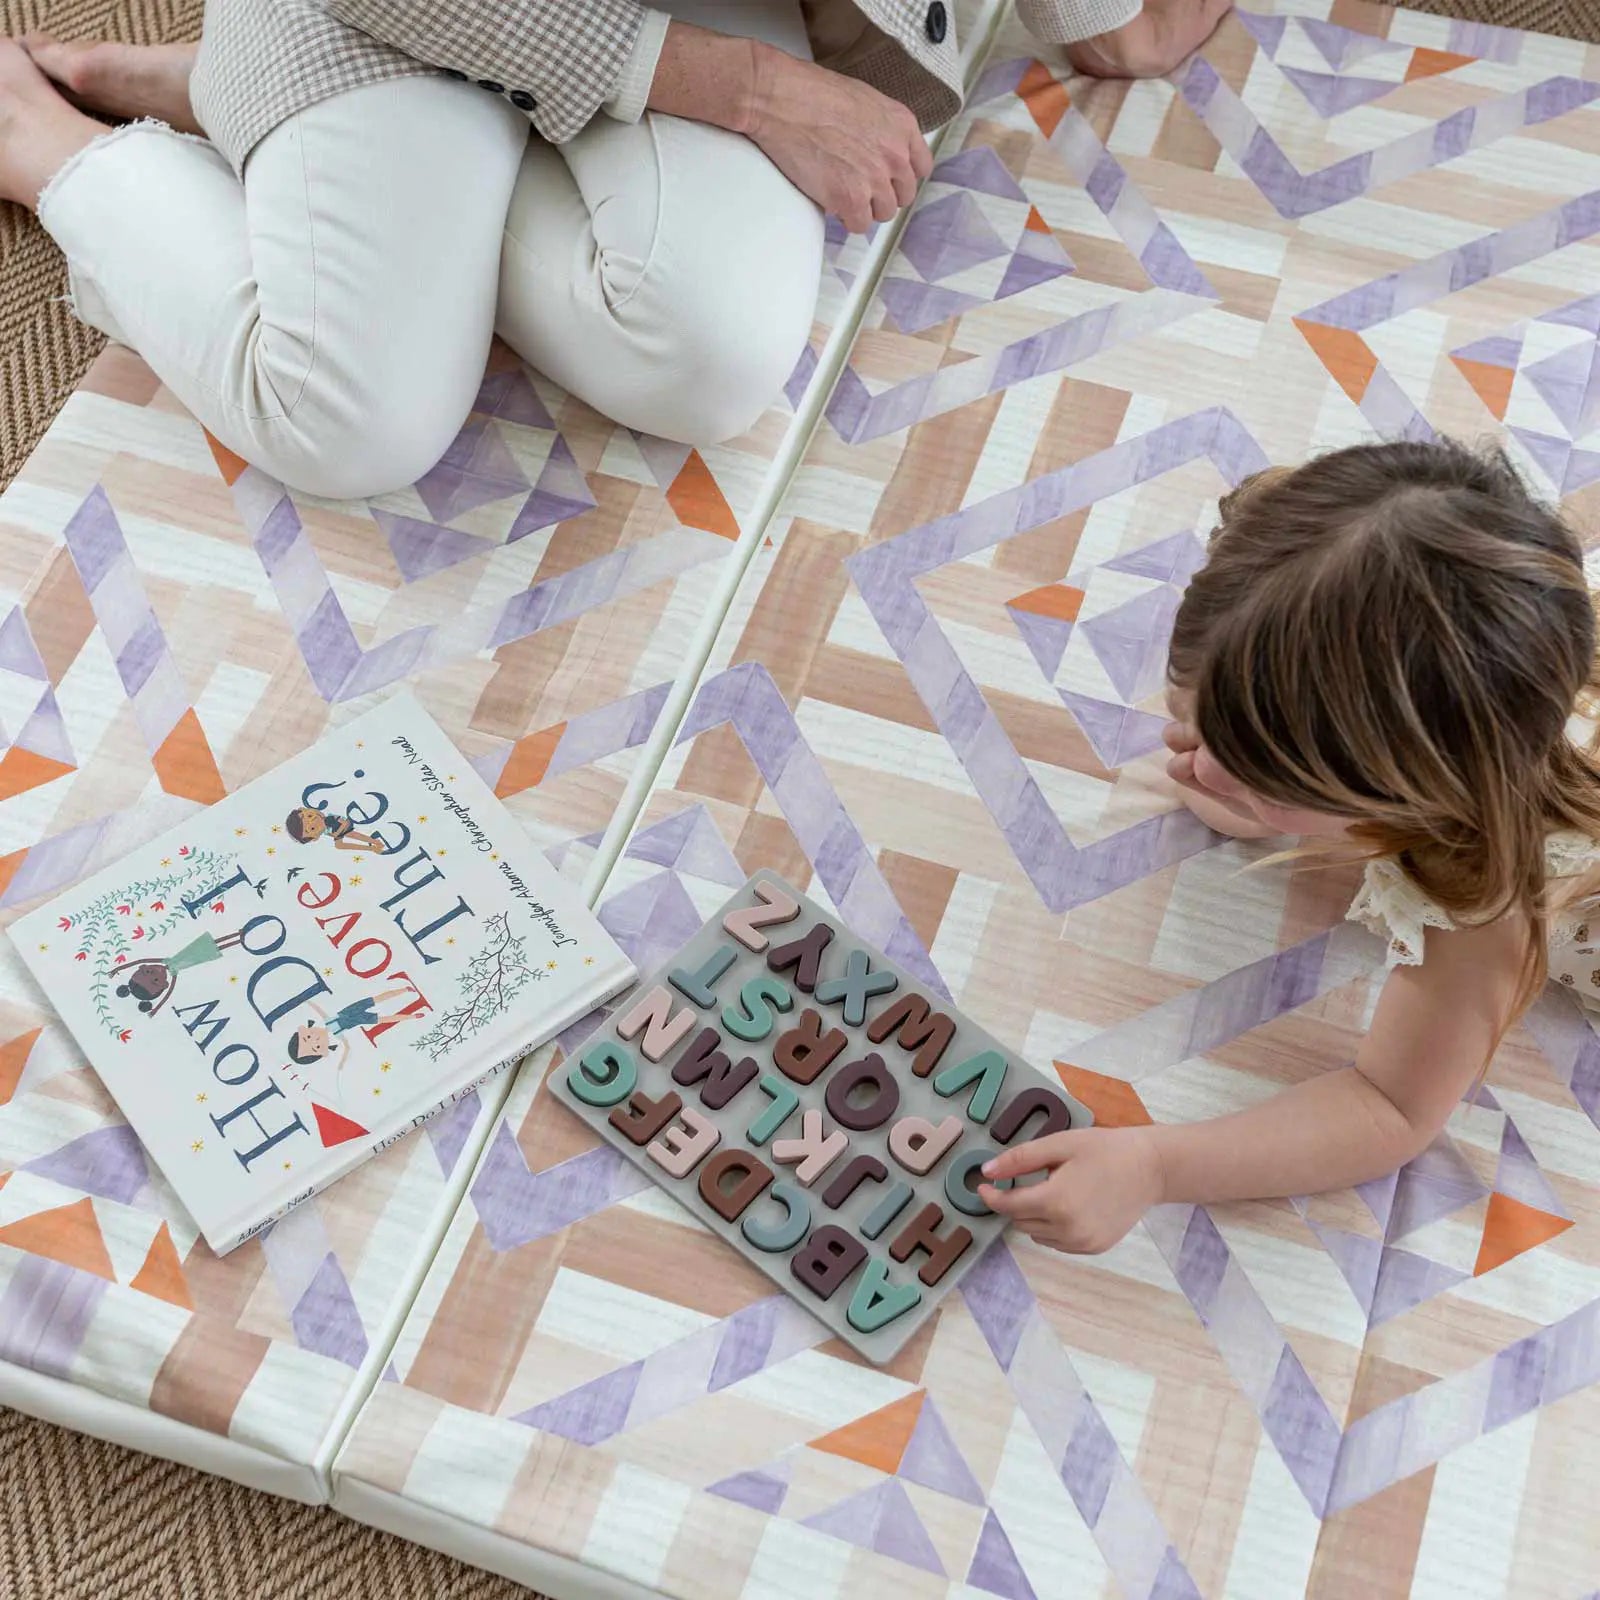 Marigold pink, purple, and orange quilt pattern tumbling mat, shown from above with mom and little girl playing with wooden alphabet puzzle.